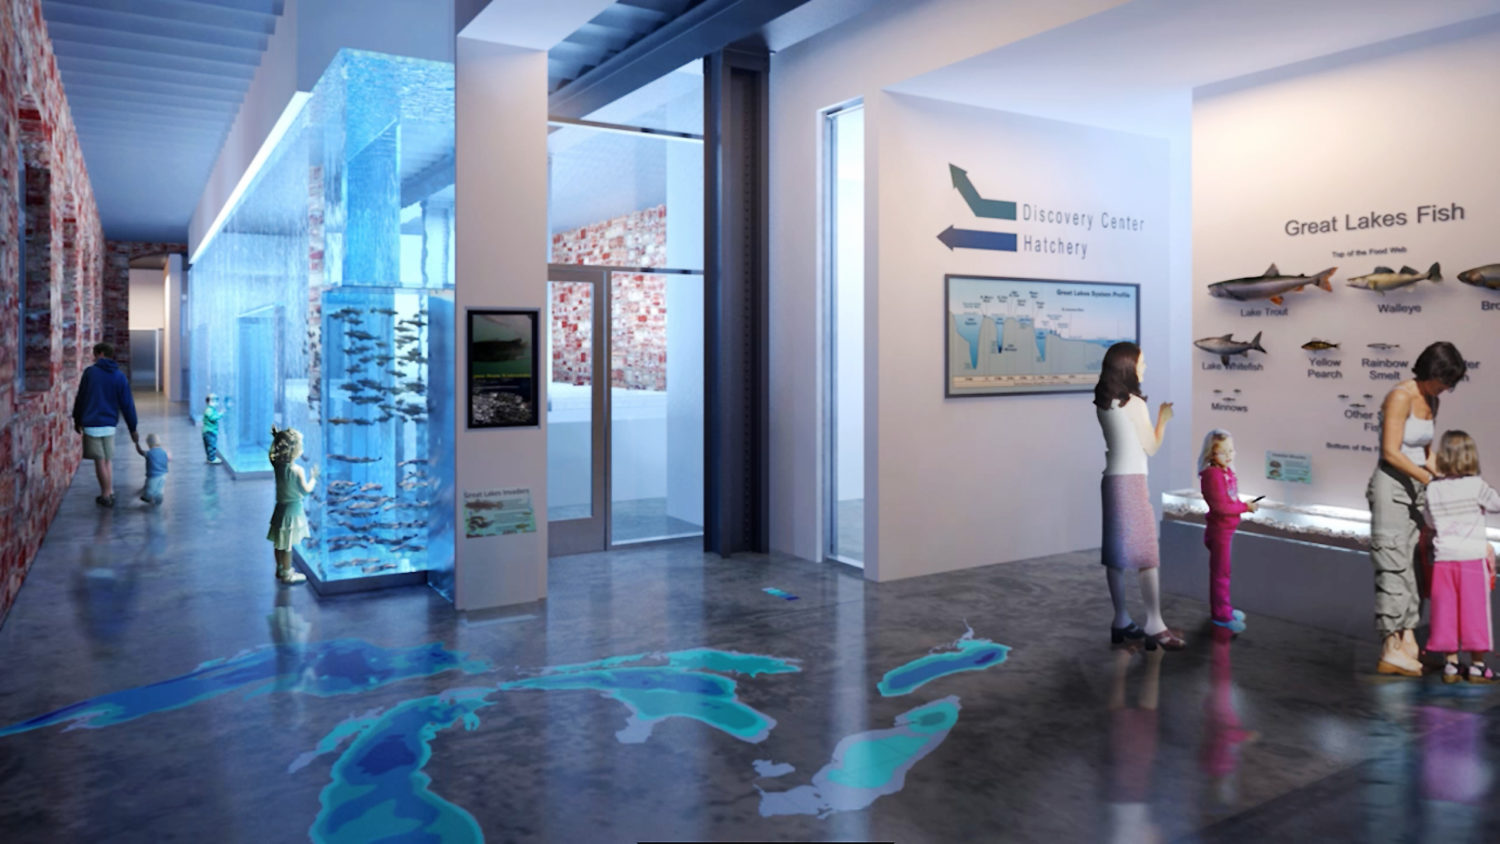 An artist's rendering of the Center for Freshwater Research and Education's visitor's center